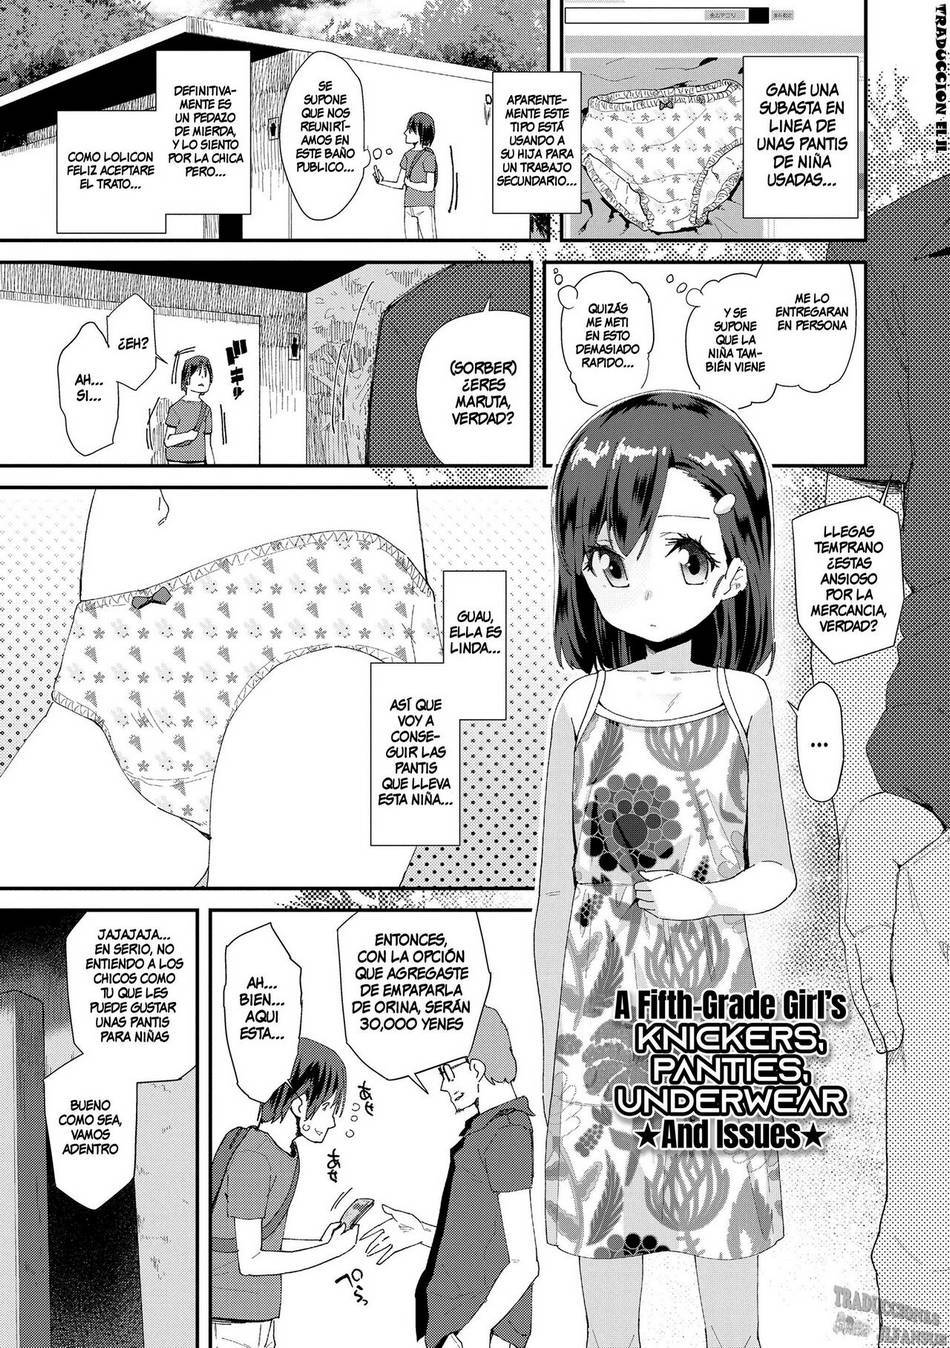 A Fifth-Grade Girl’s Knickers, Panties, Underwear ★And Issues★ - Page #1